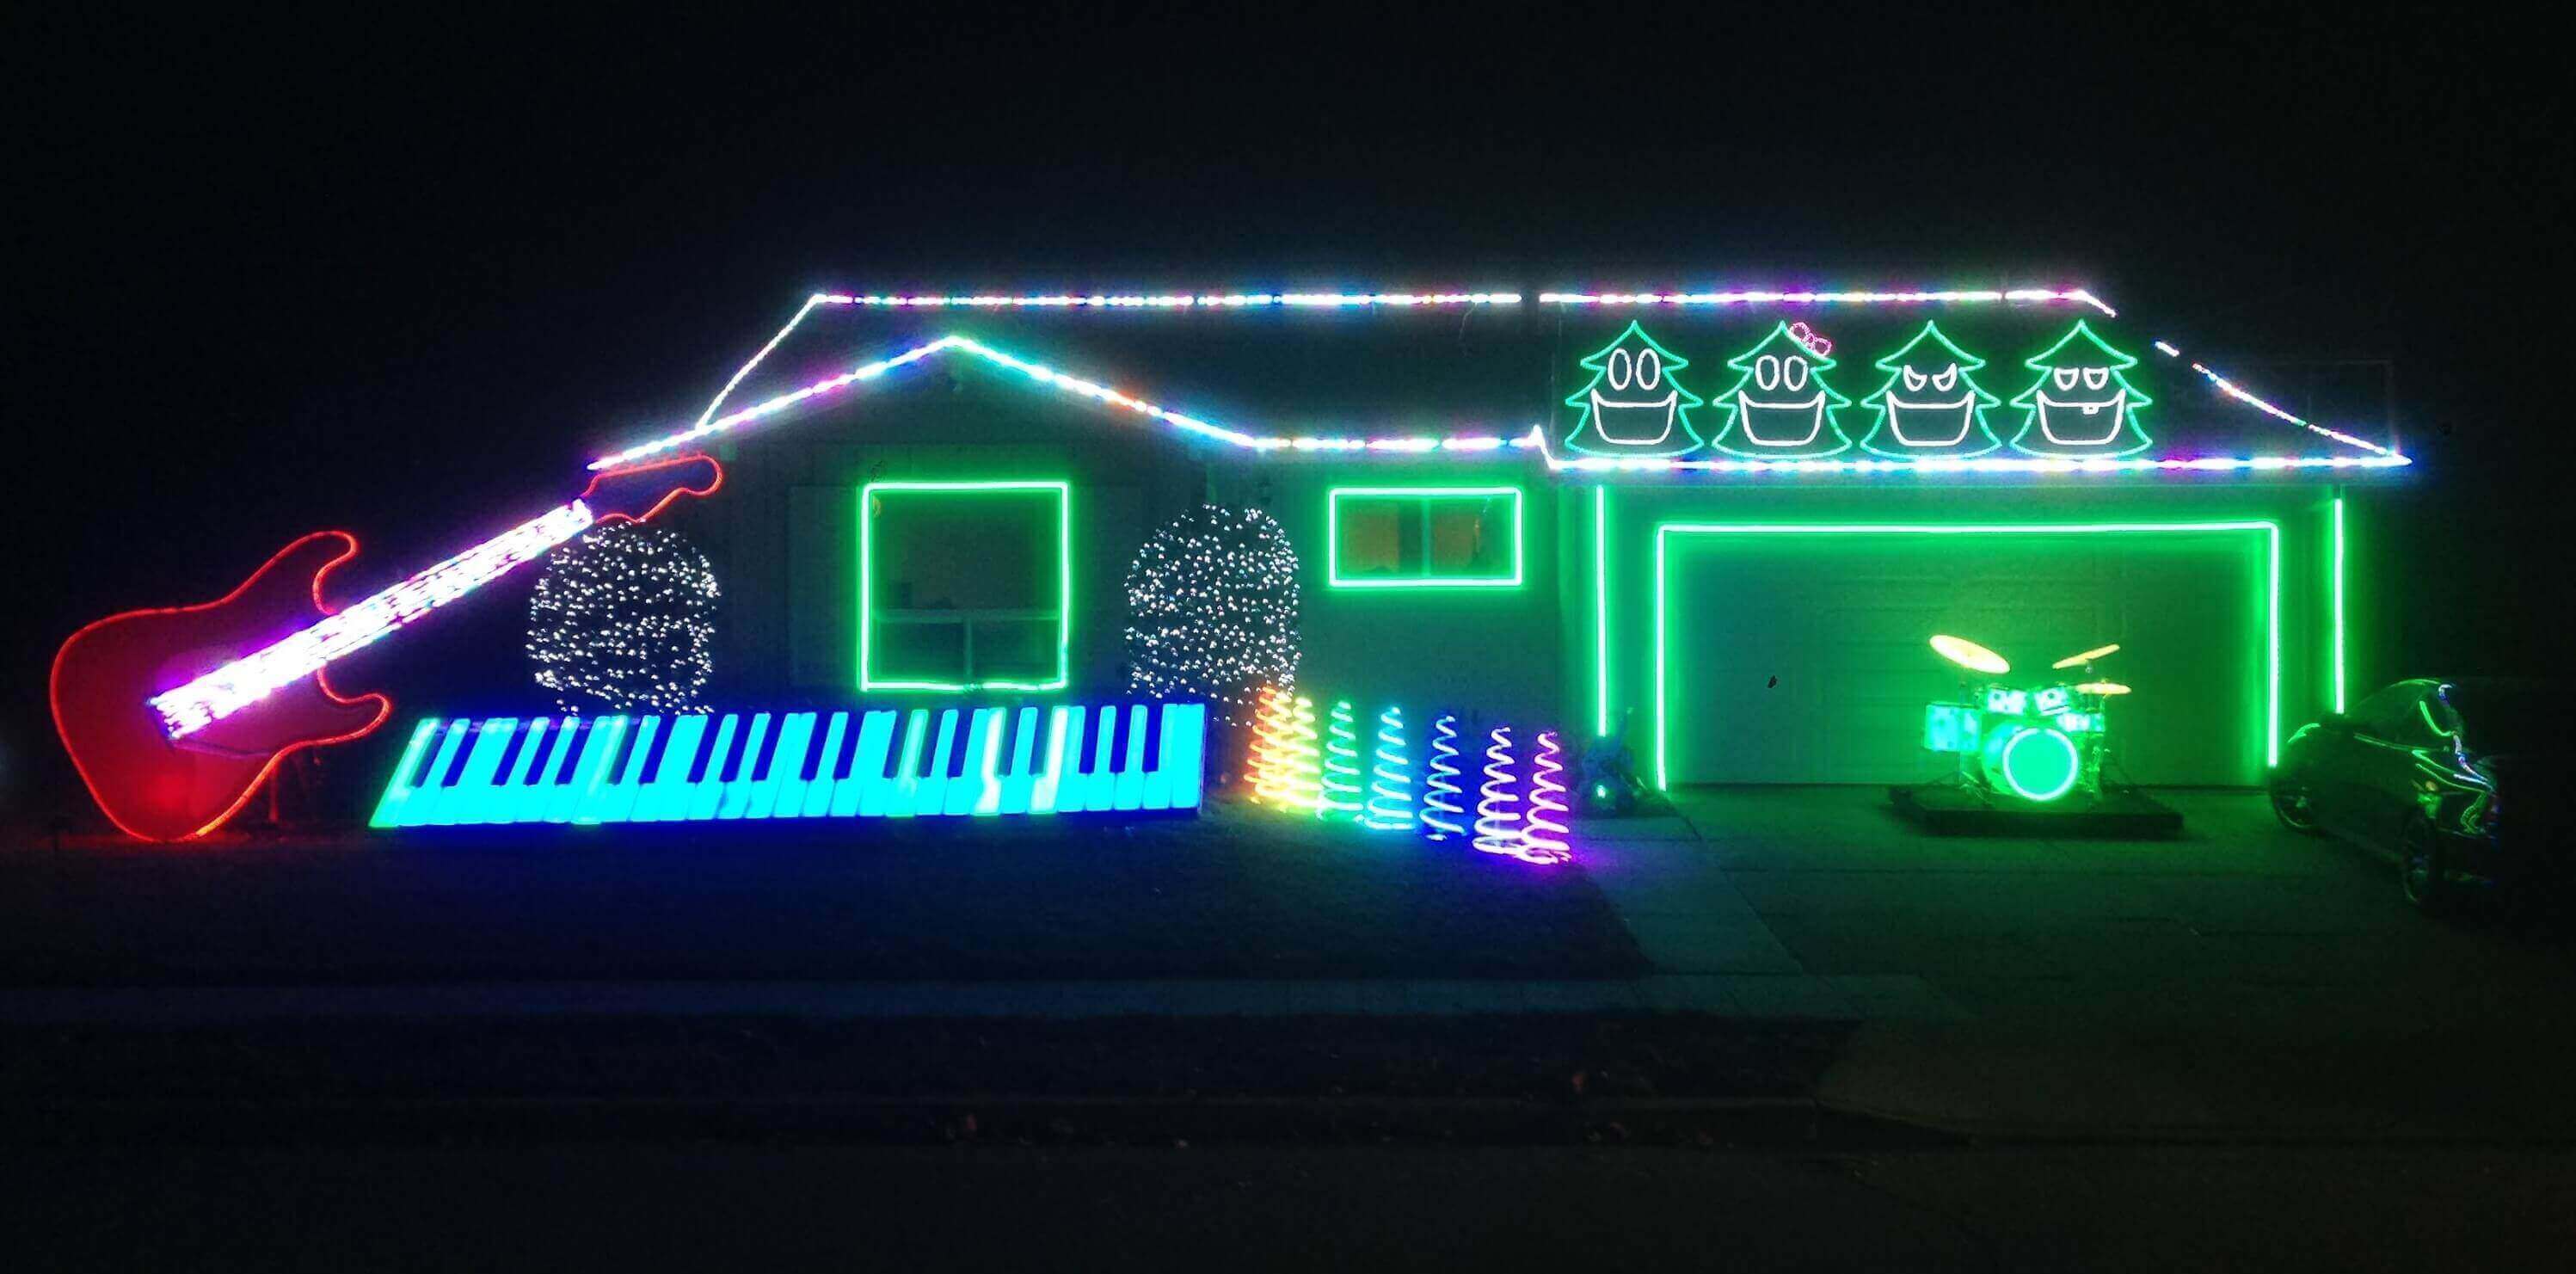 The best rock n’ roll and heavy metal Christmas decorations